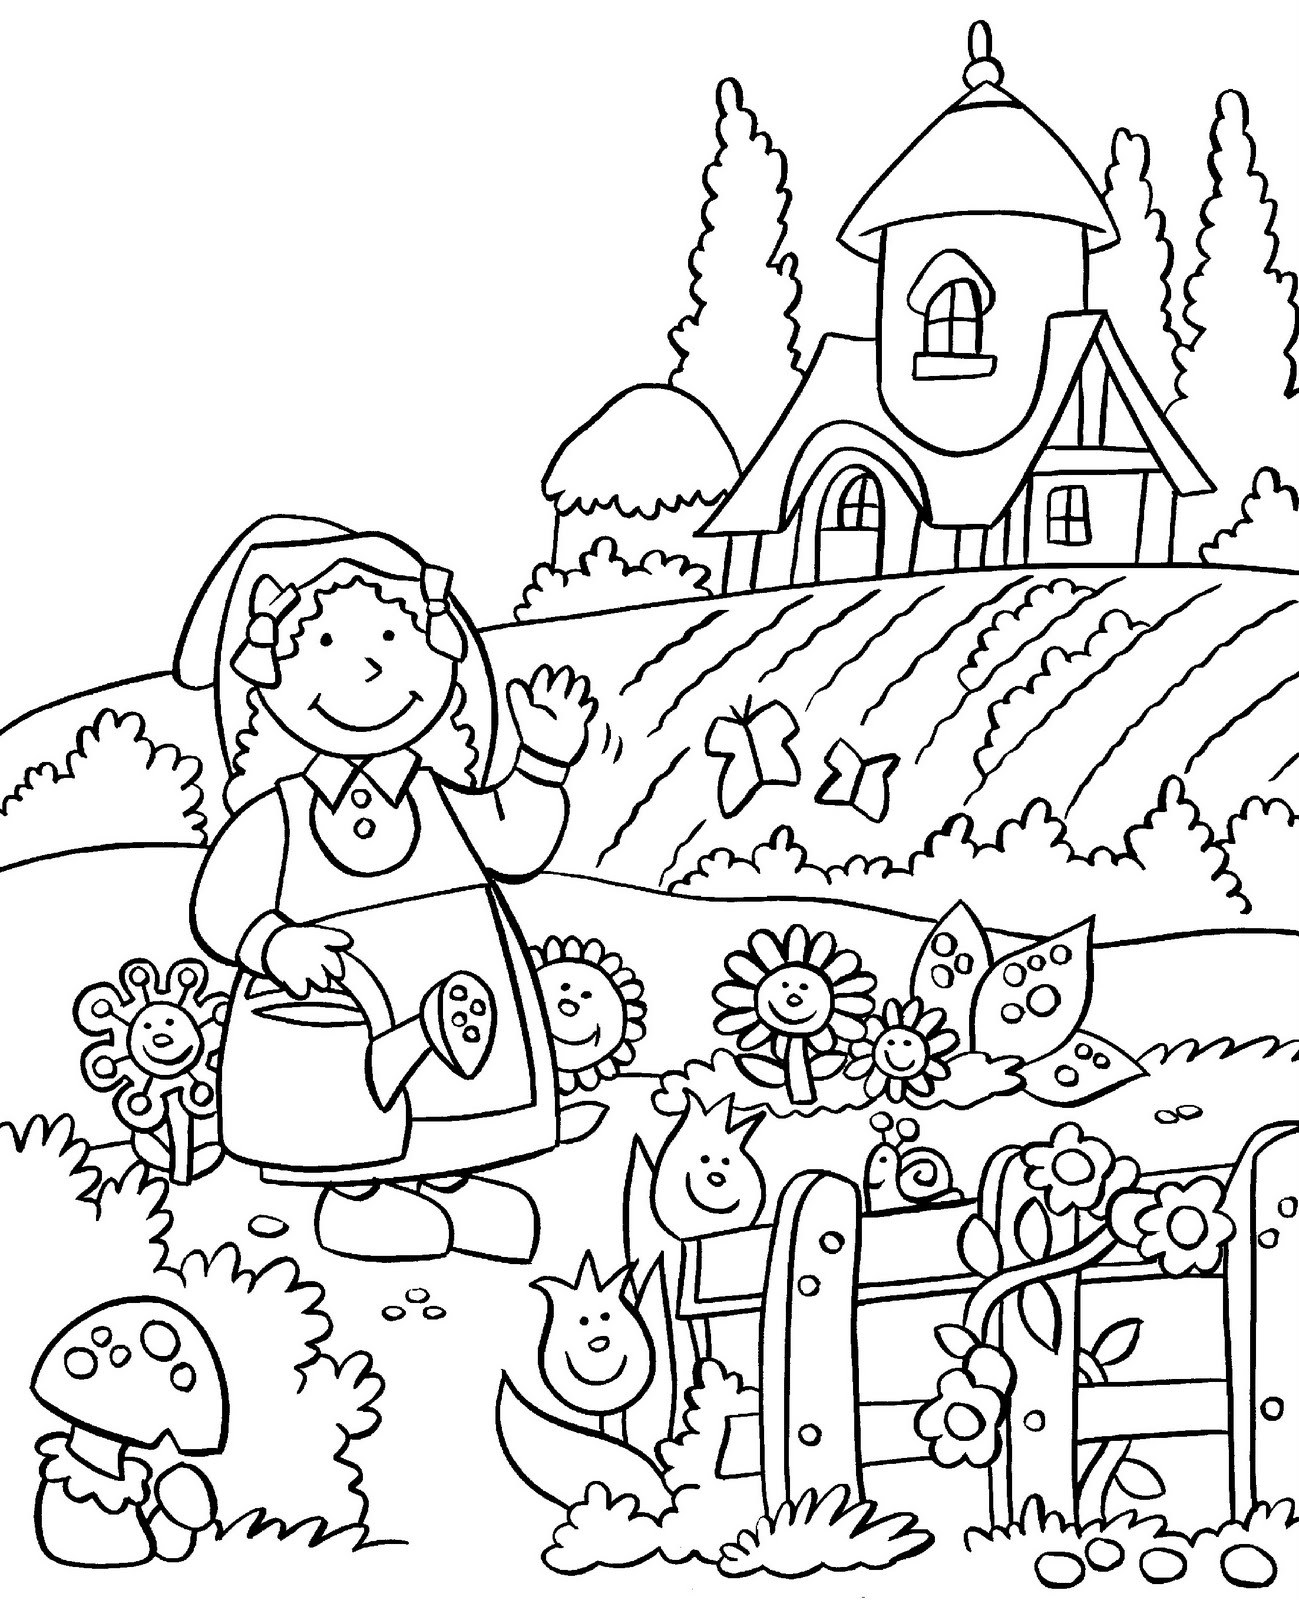 Country Scenes Coloring Pages at GetColorings.com | Free printable